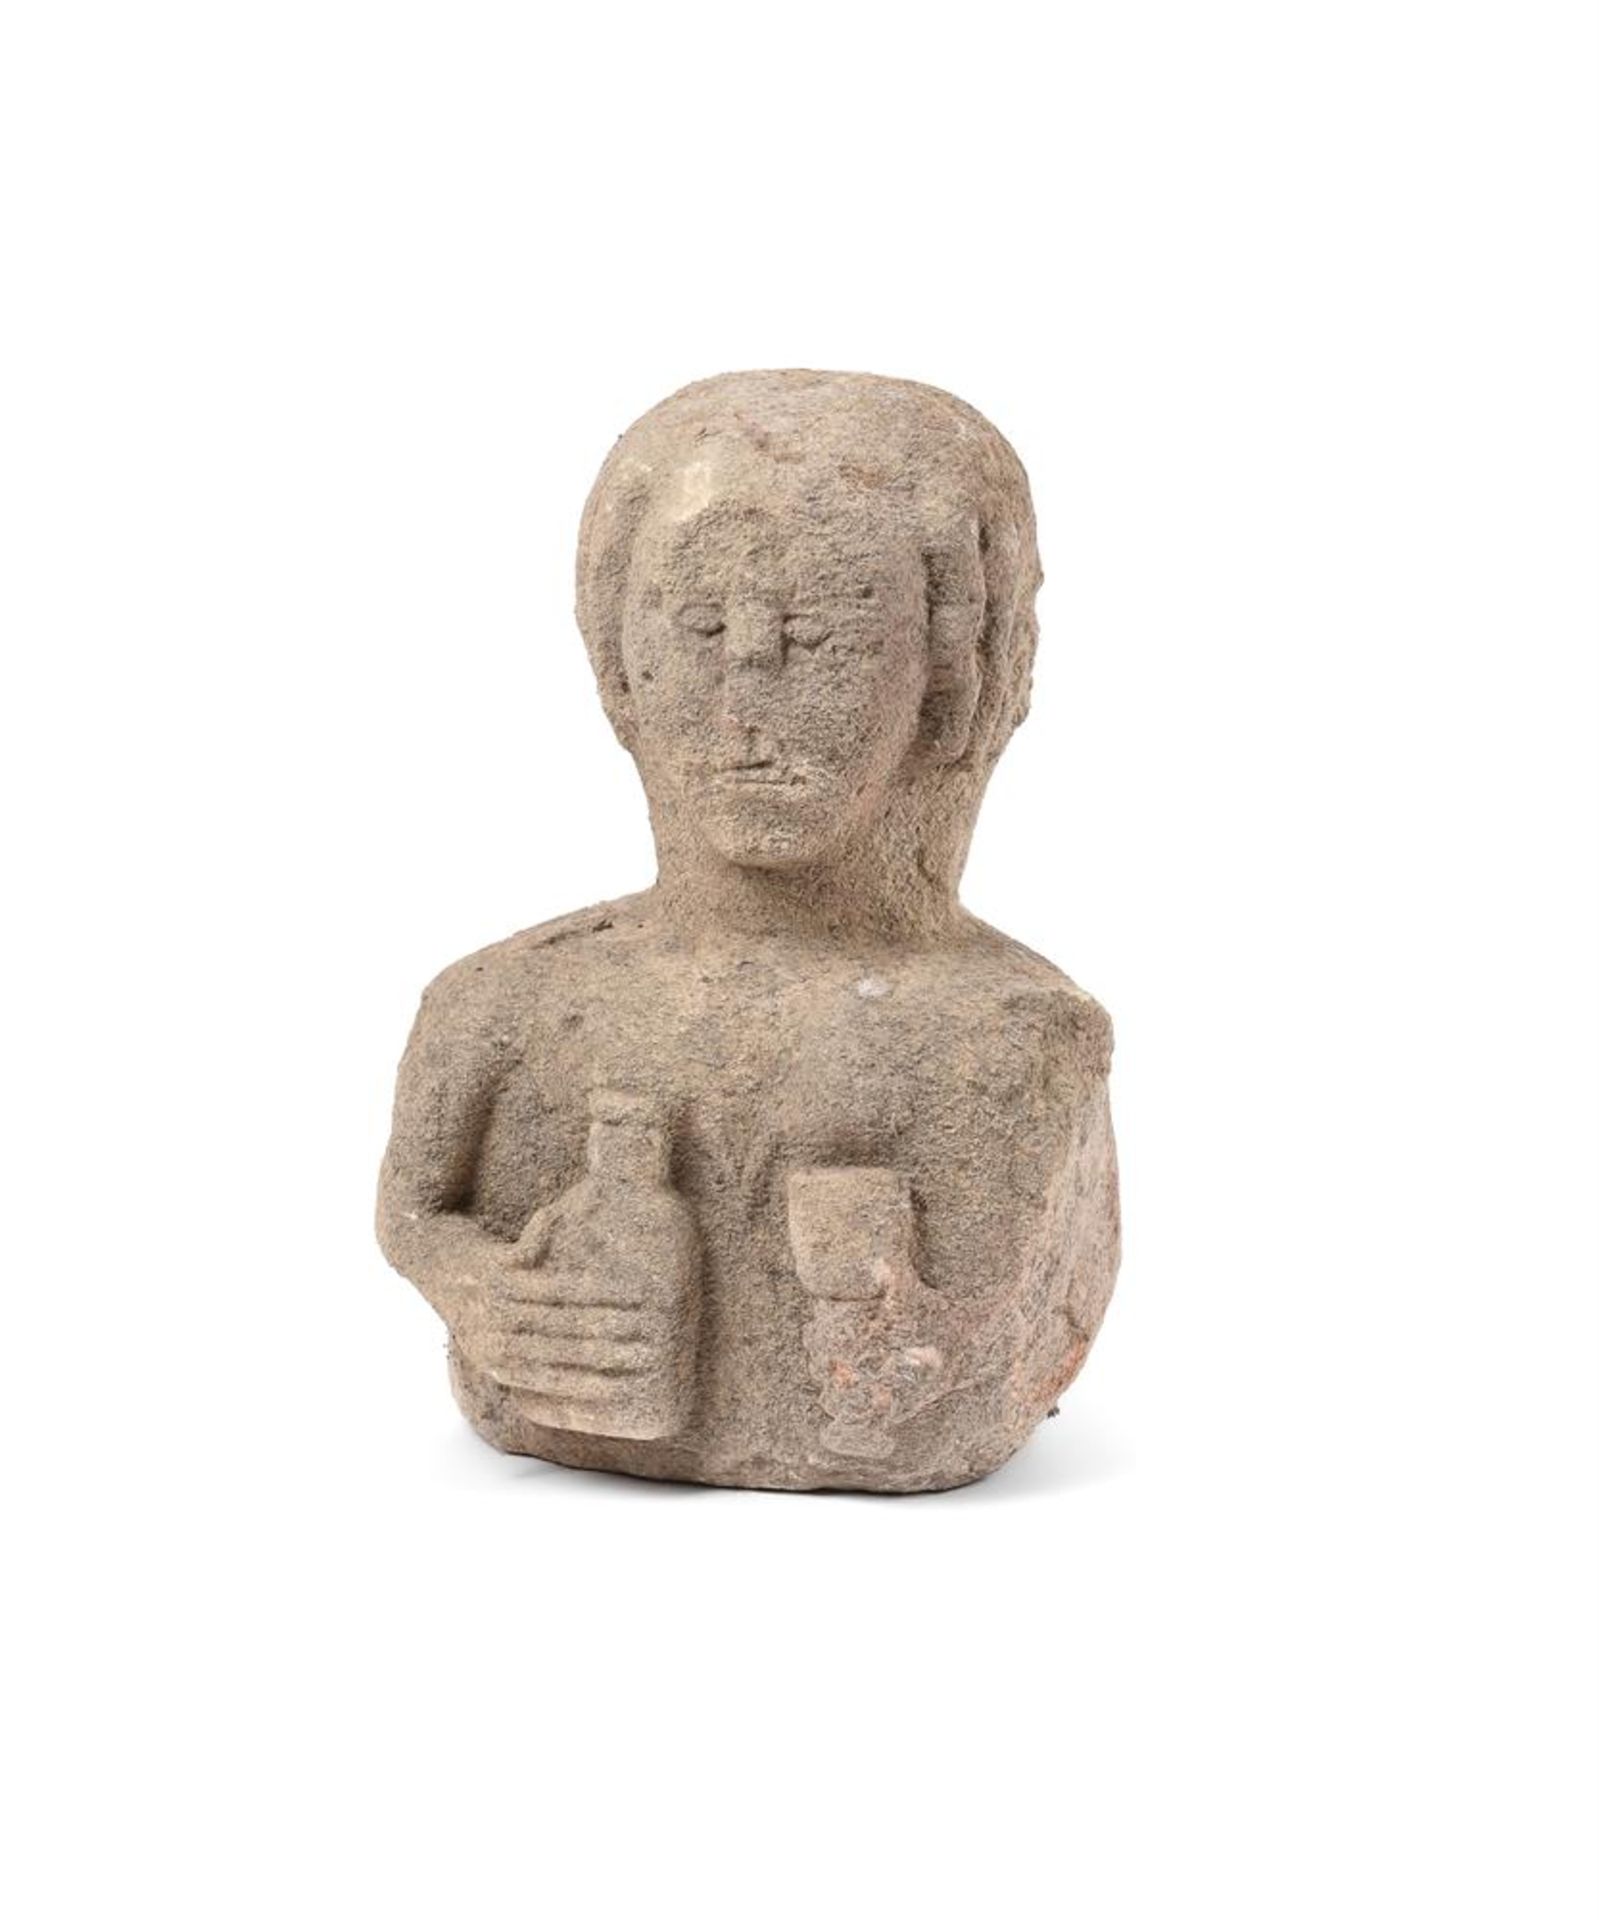 A WEATHERED CARVED STONE HALF LENGTH FIGURE OF A TOPER MAIDEN, PROBABLY 17TH CENTURY OR EARLIER